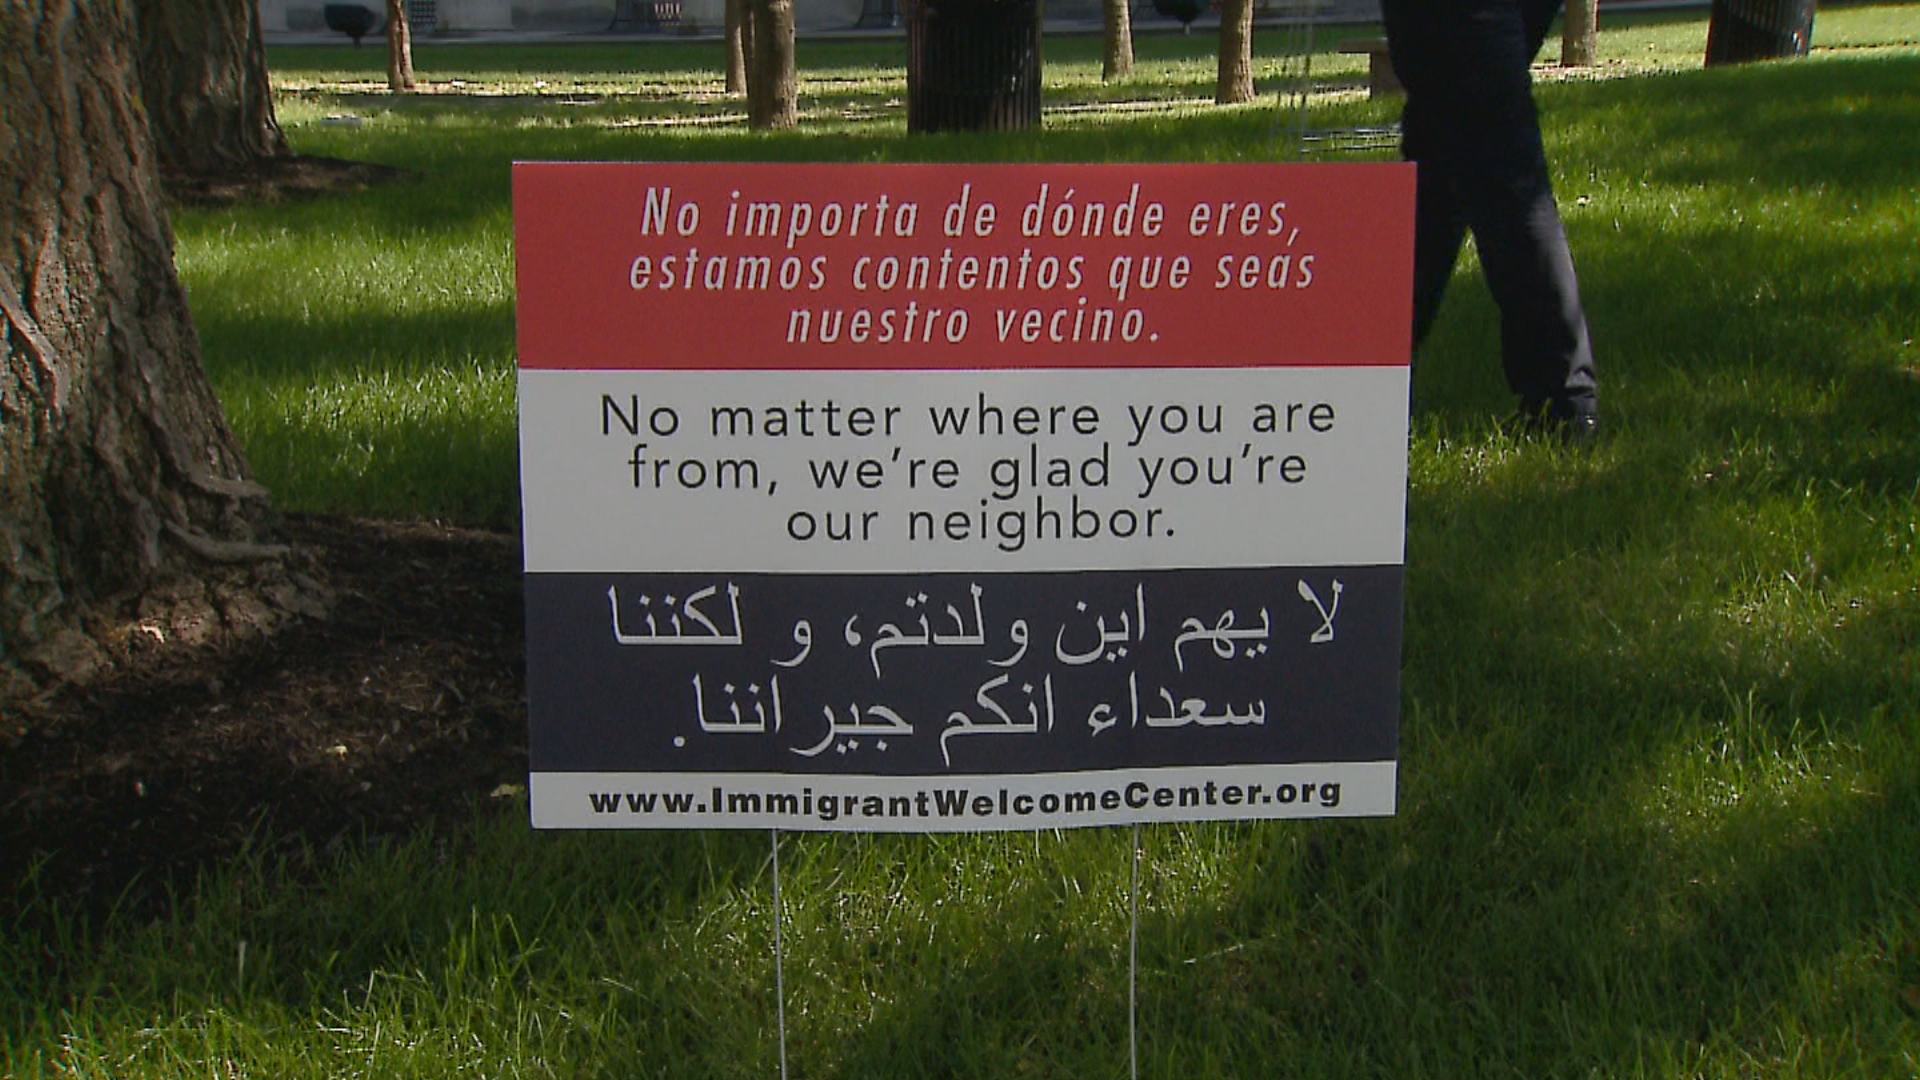 Immigrant welcome center kicks off welcome week